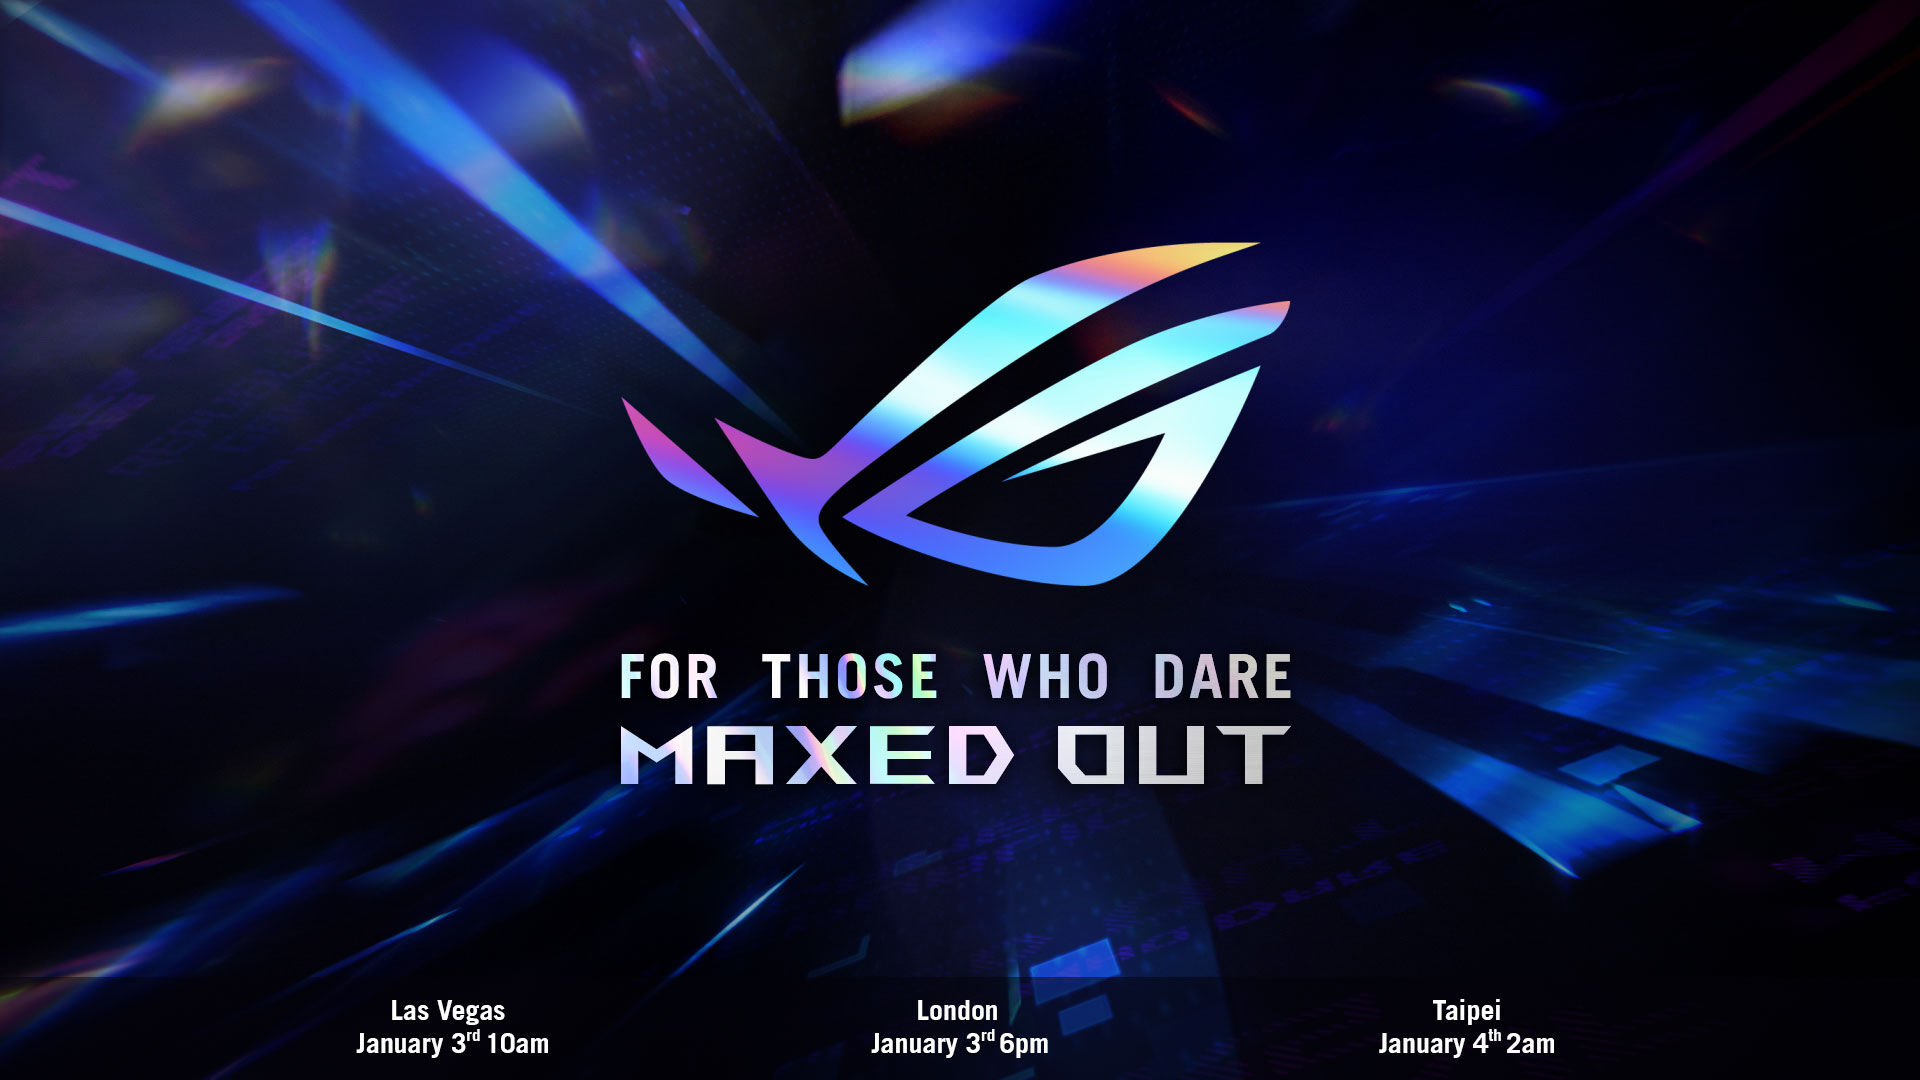 ASUS ROG Announces For Those Who Dare: Maxed Out Virtual Event For CES –  